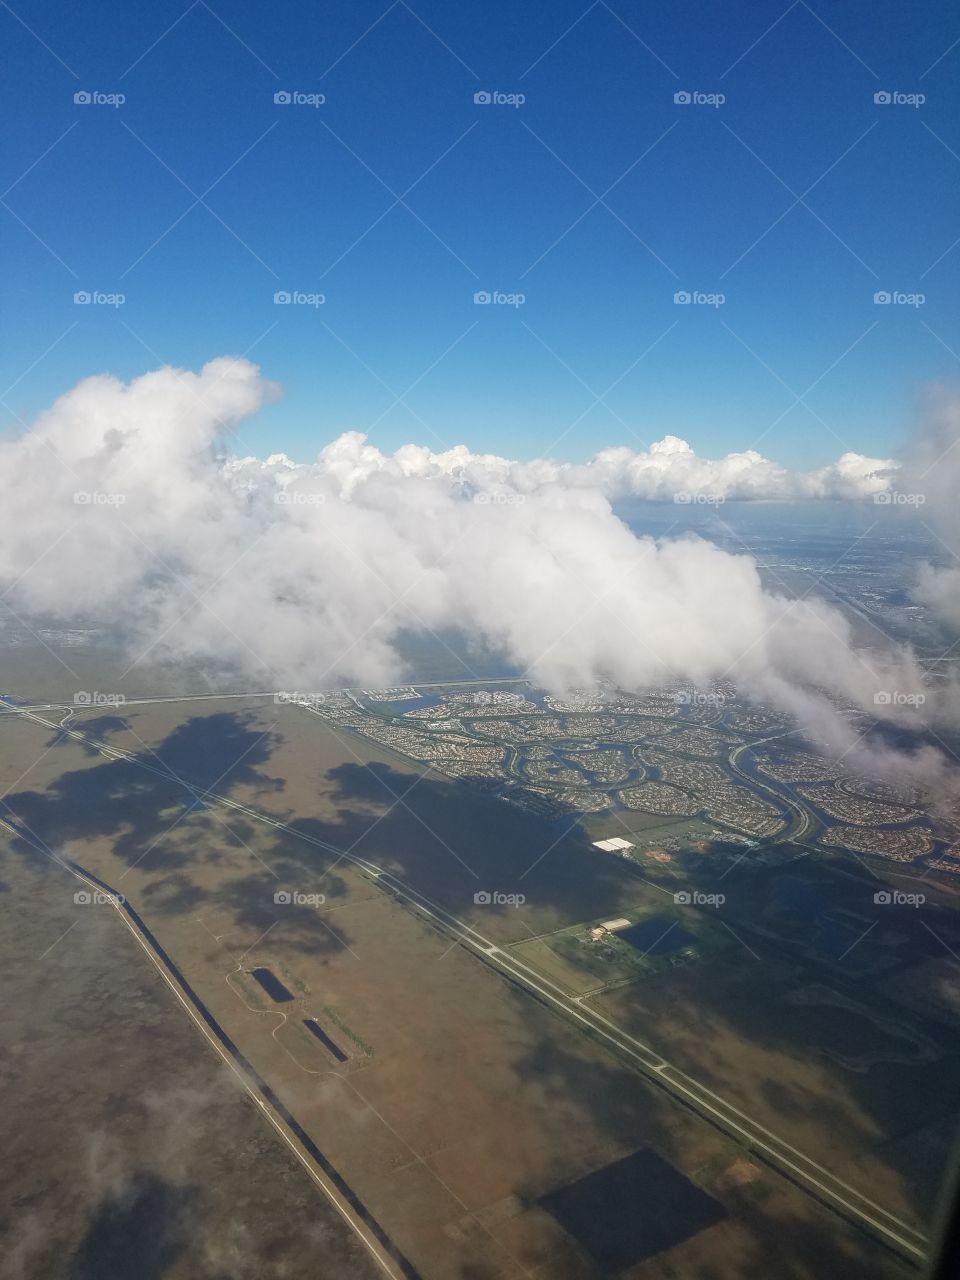 A view from the clouds